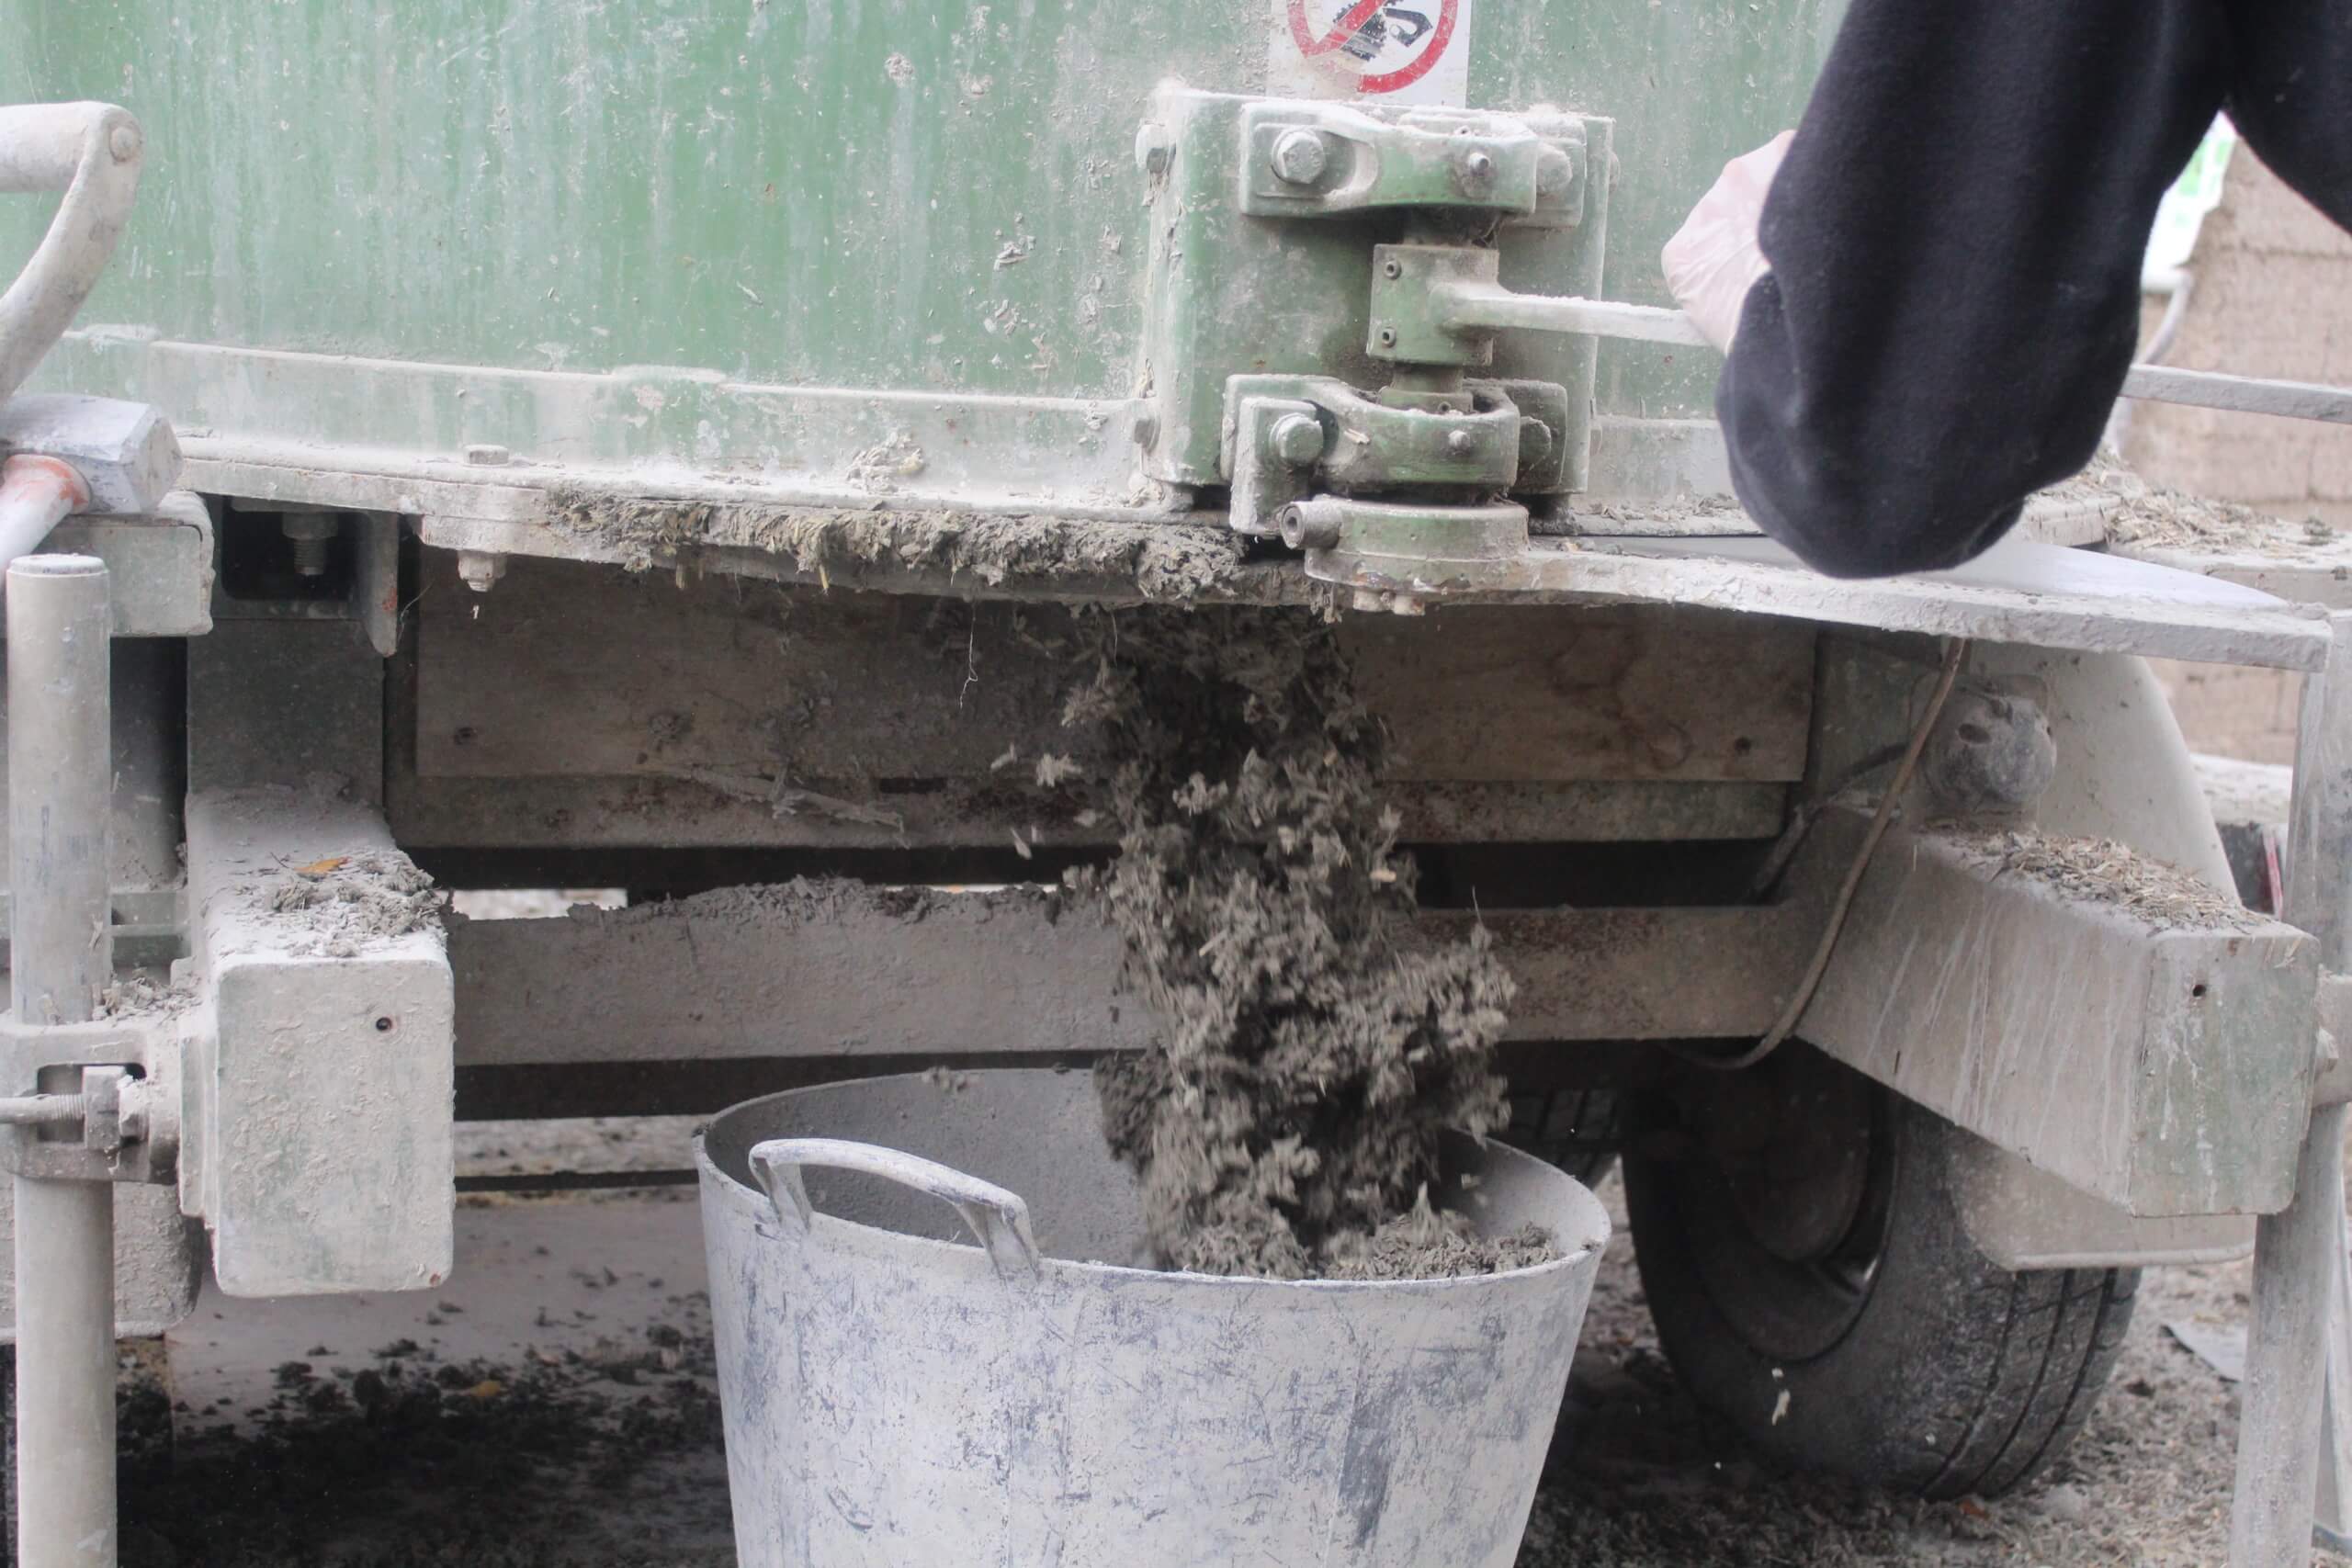 emptying hempcrete from a pan mixer into a flexible tub ready for placement between shutters